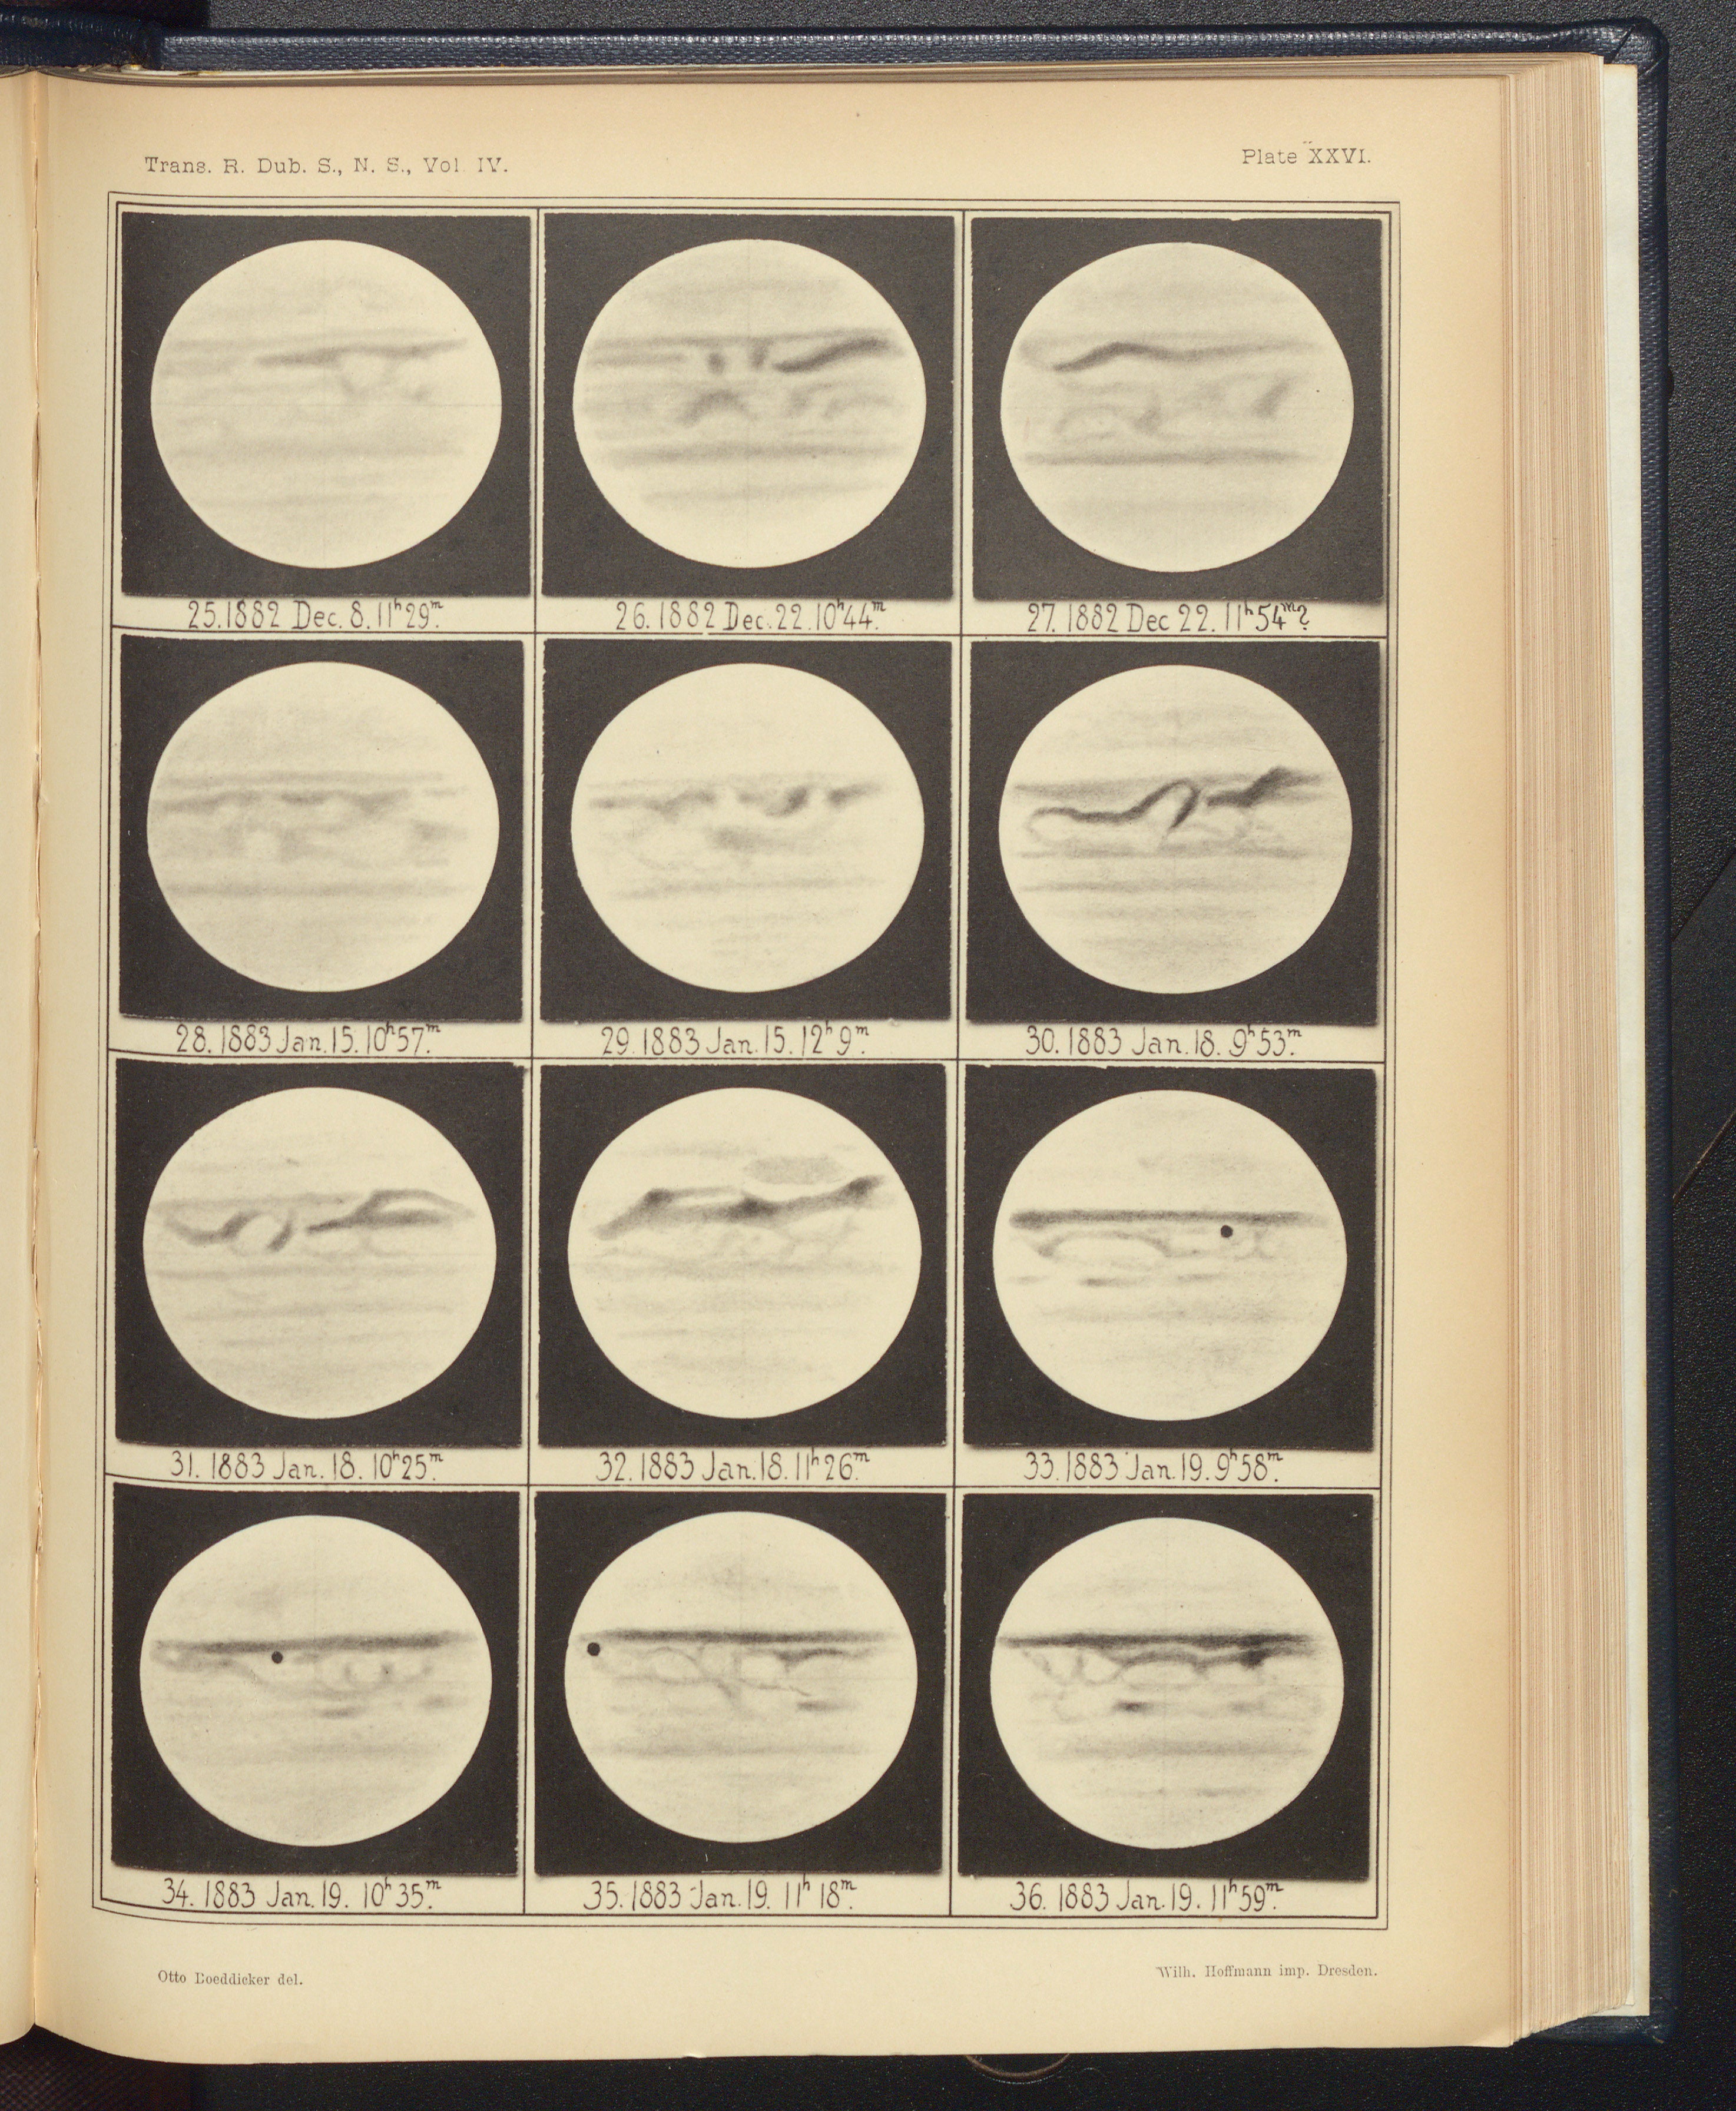 Twelve views of Jupiter, 1882-83, lithograph after drawings by Otto Boeddicker, in Scientific Transactions of the Royal Dublin Society, ser. 2, vol. 4, plate 26, 1889 (Linda Hall Library)